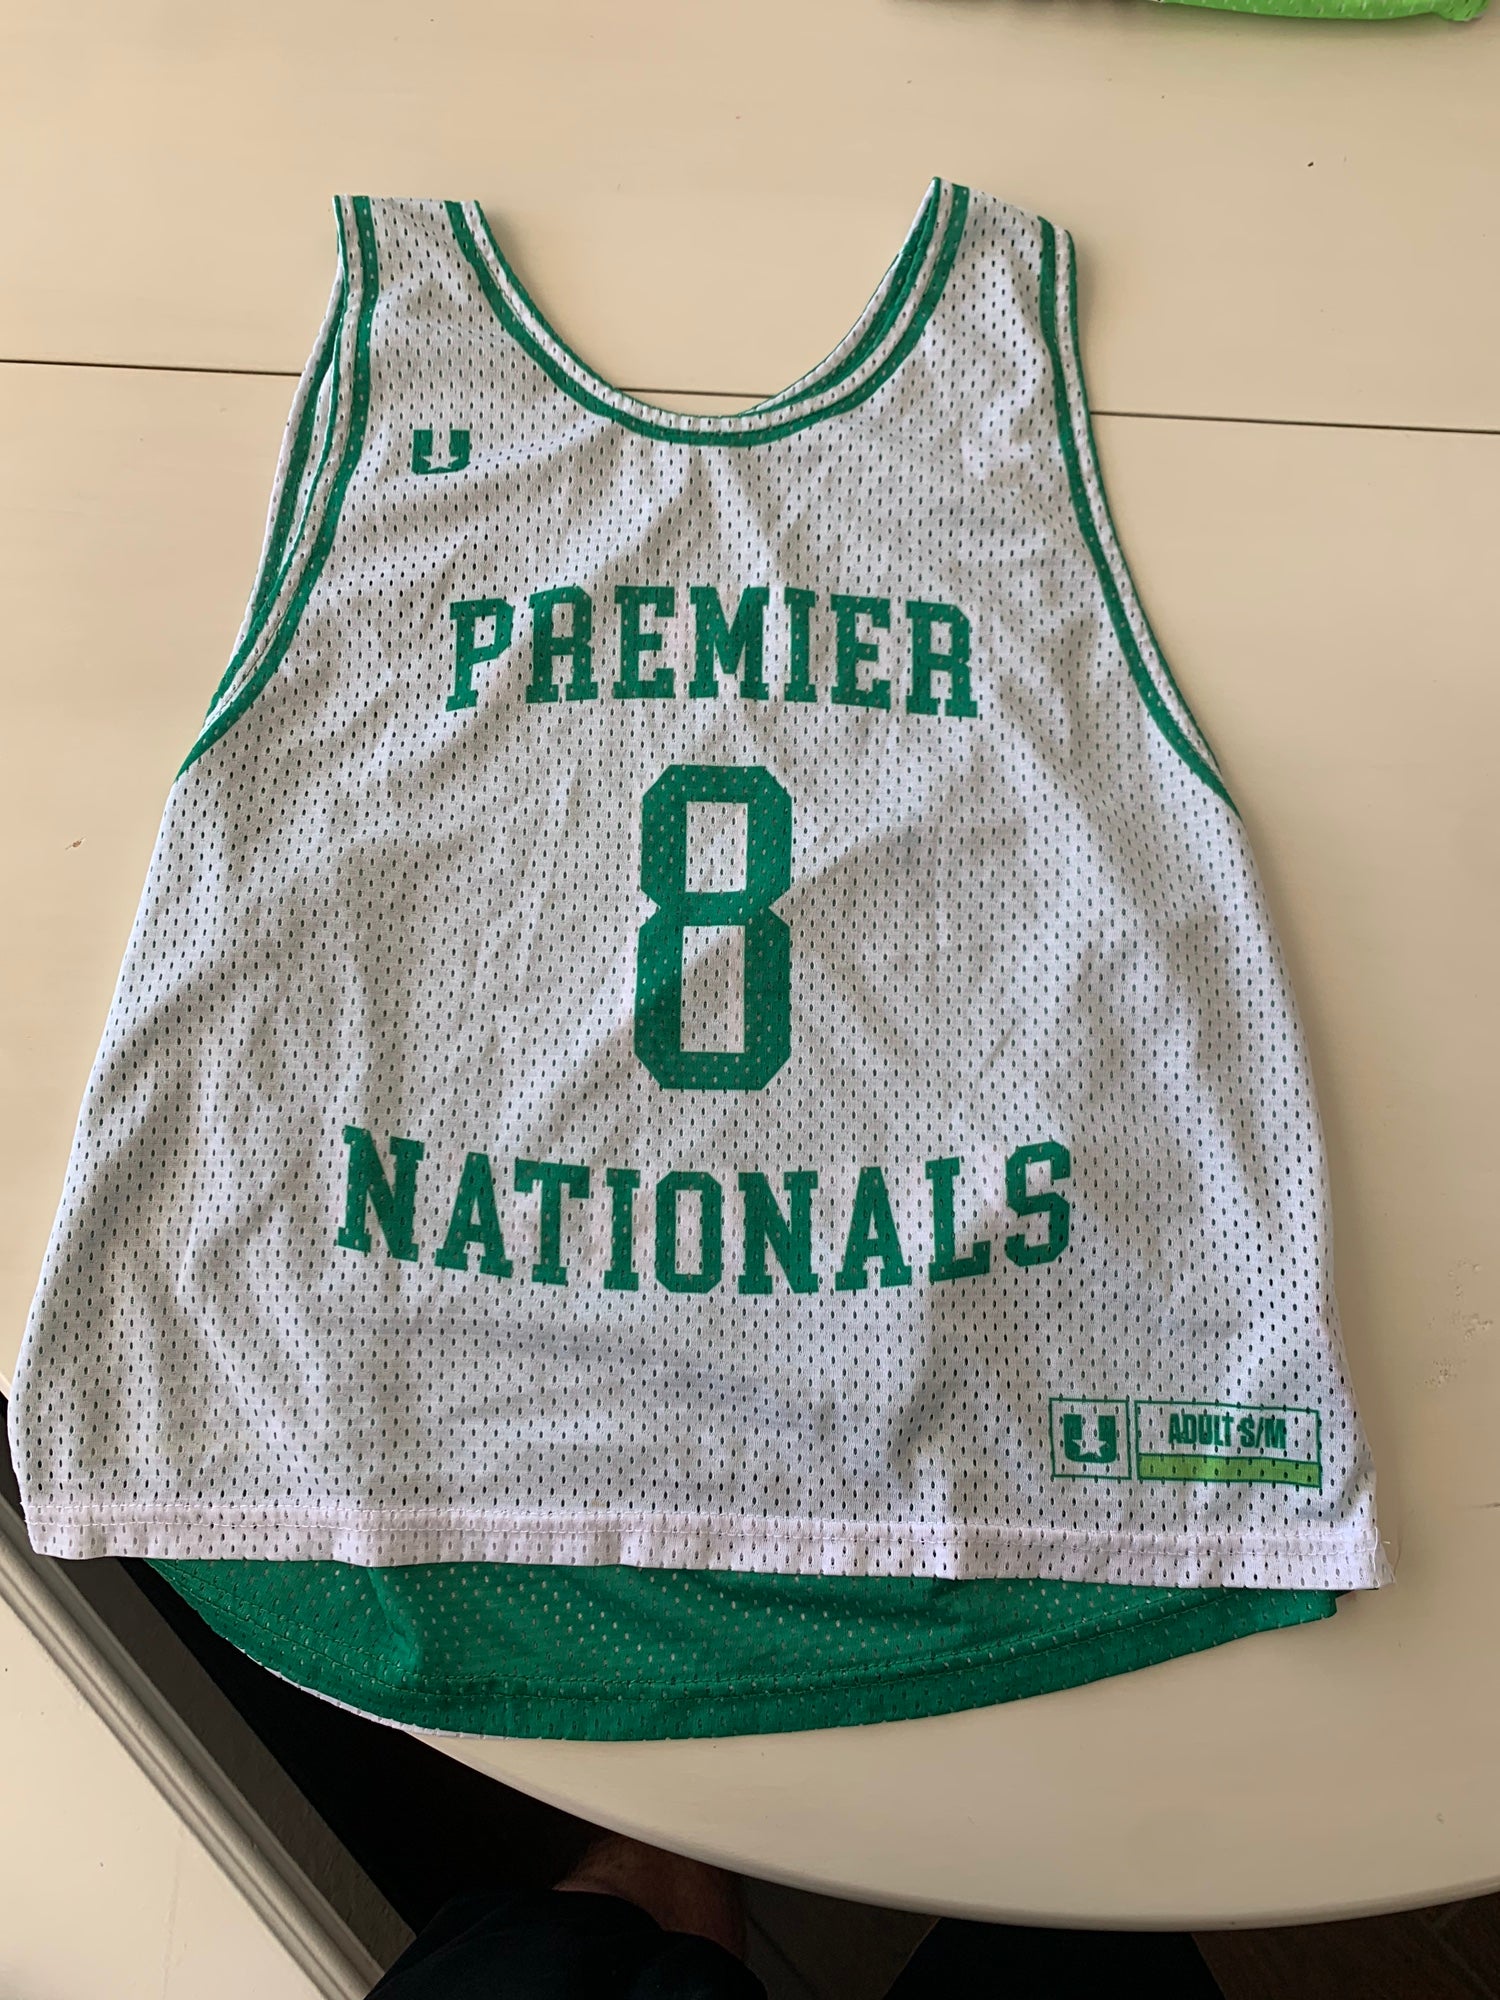 new nationals jersey